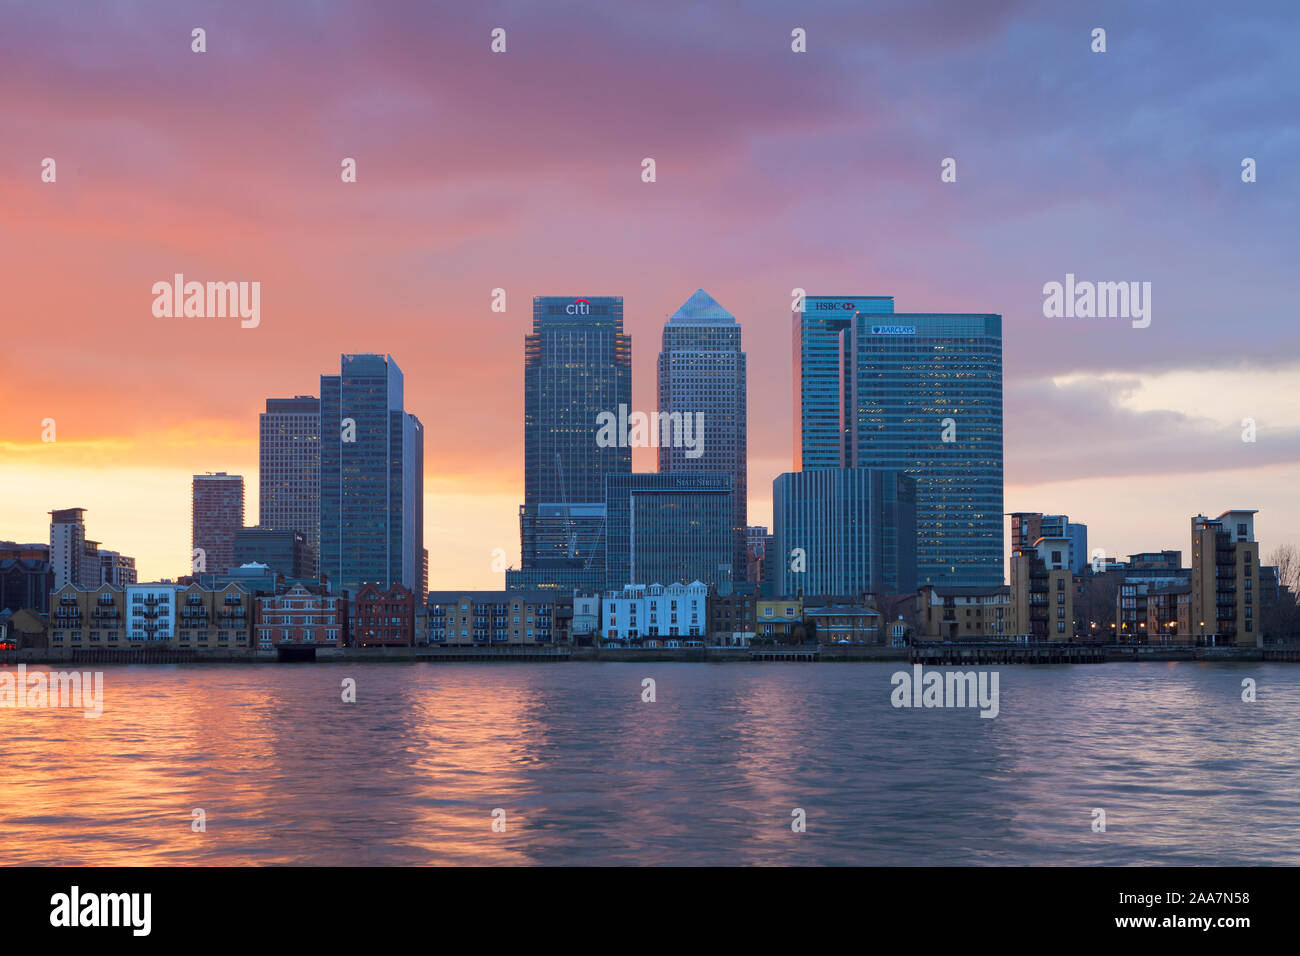 Canary Wharf viewed over the river Thames, London, UK Stock Photo